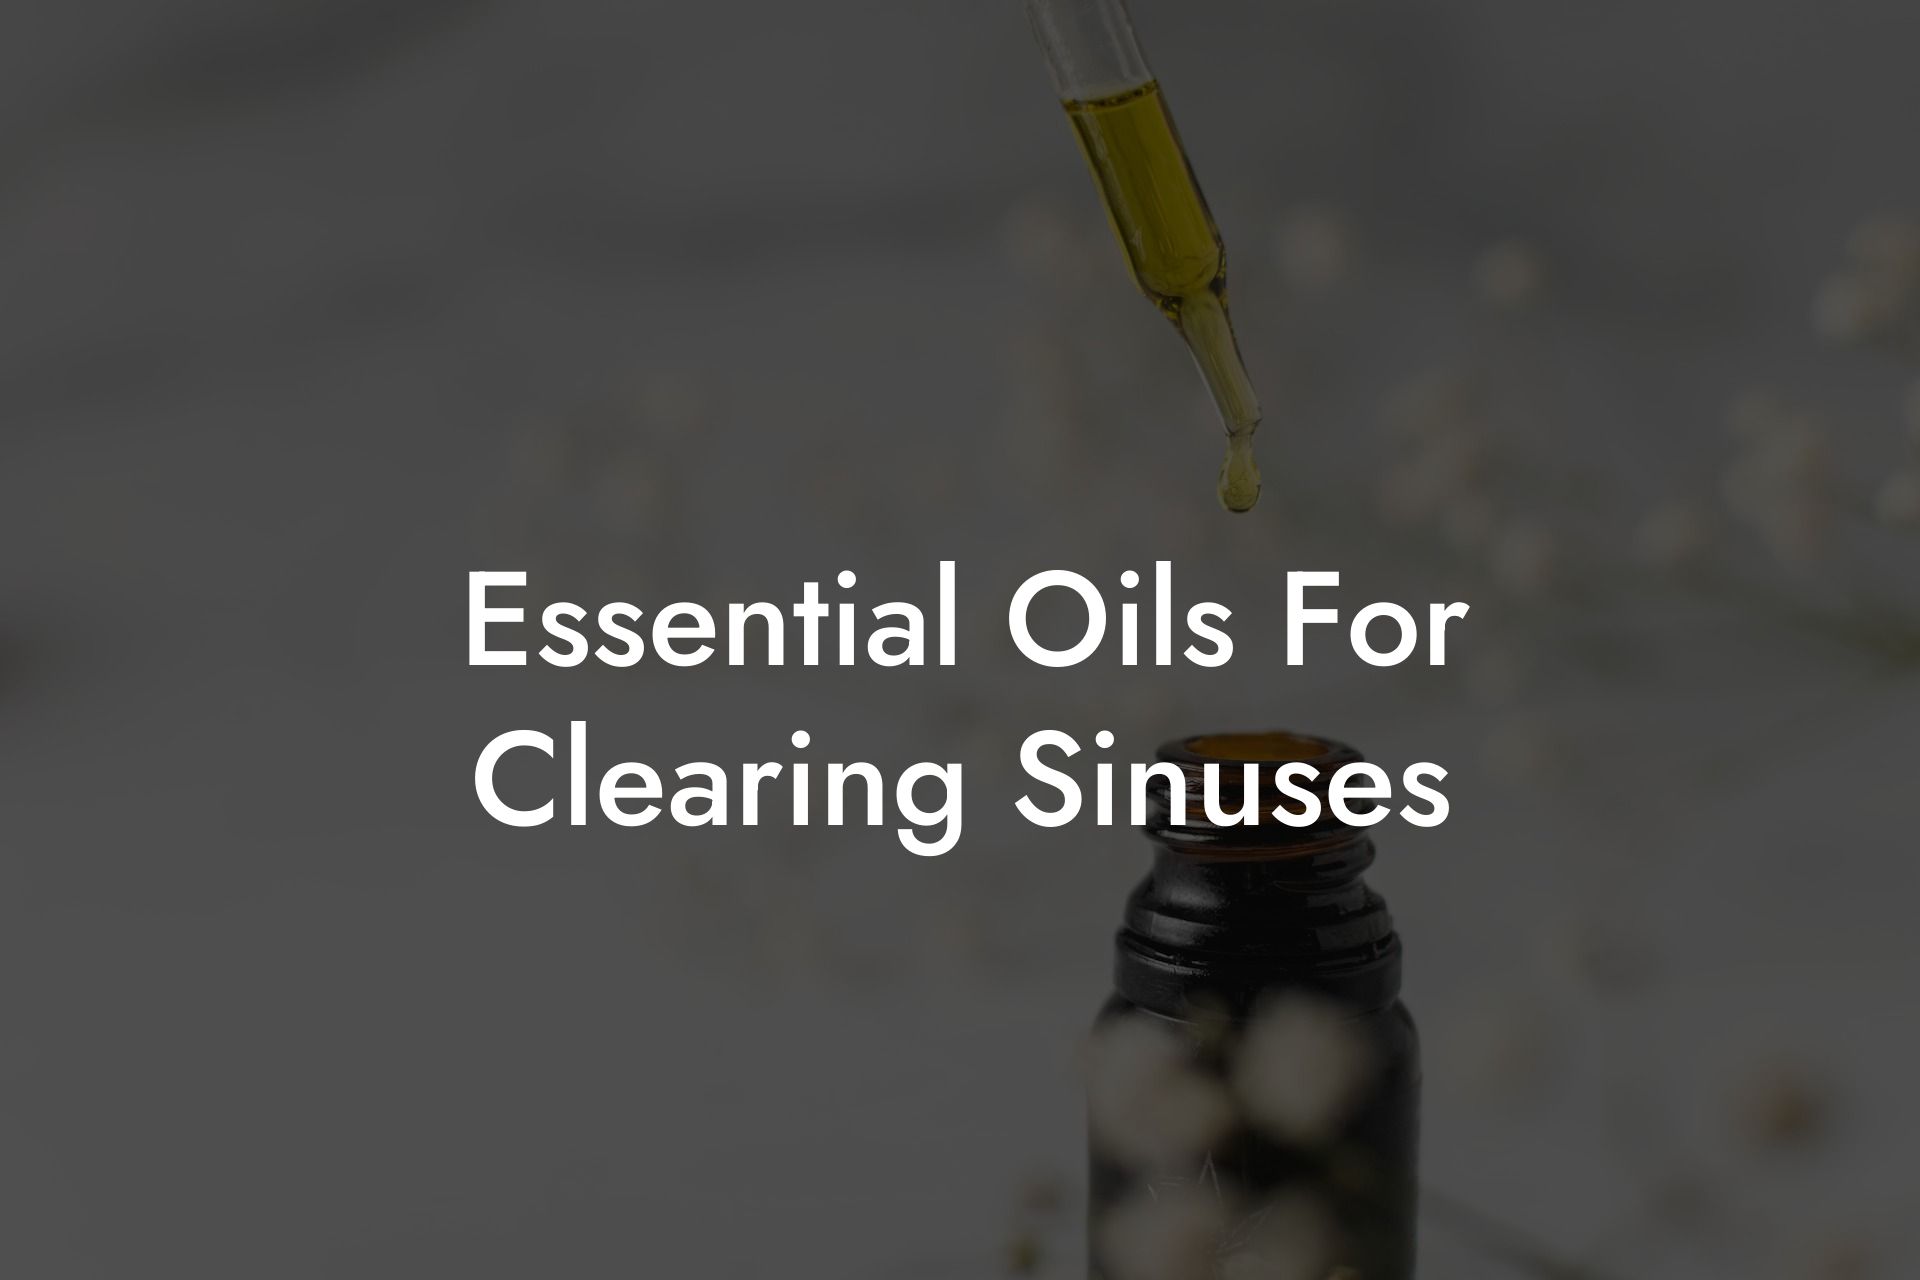 Essential Oils For Clearing Sinuses